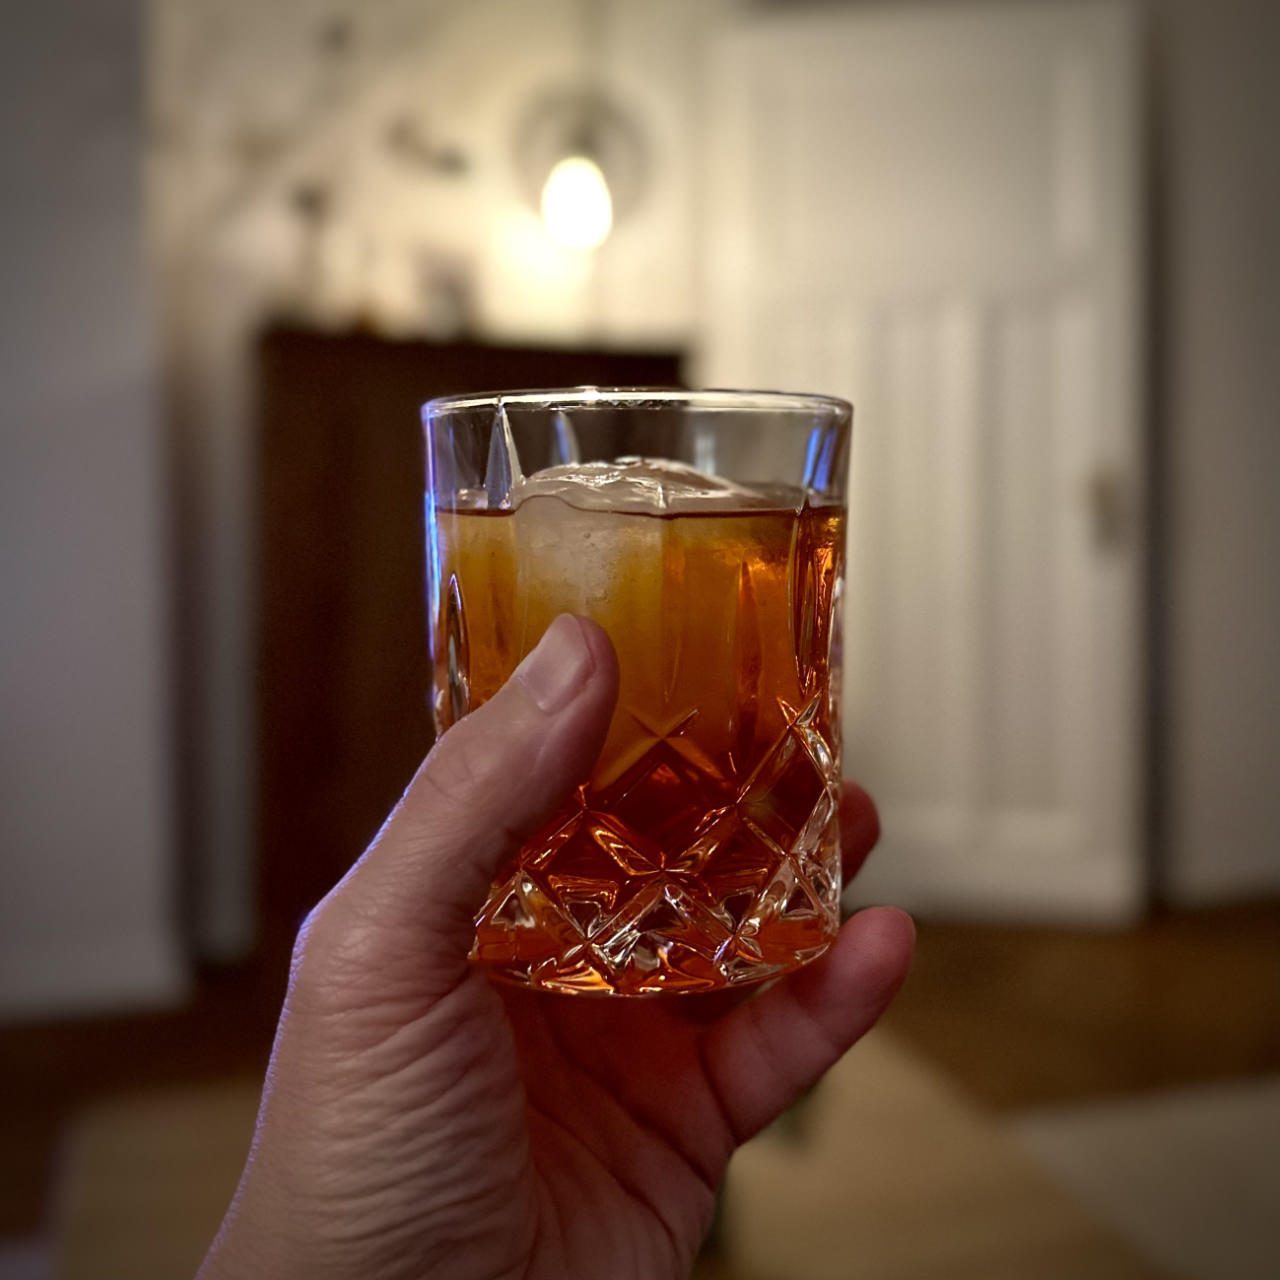 A squared photo on which you see my hand holding a negroni – a red drink containing equal parts of gin, sweet vermouth and Campari